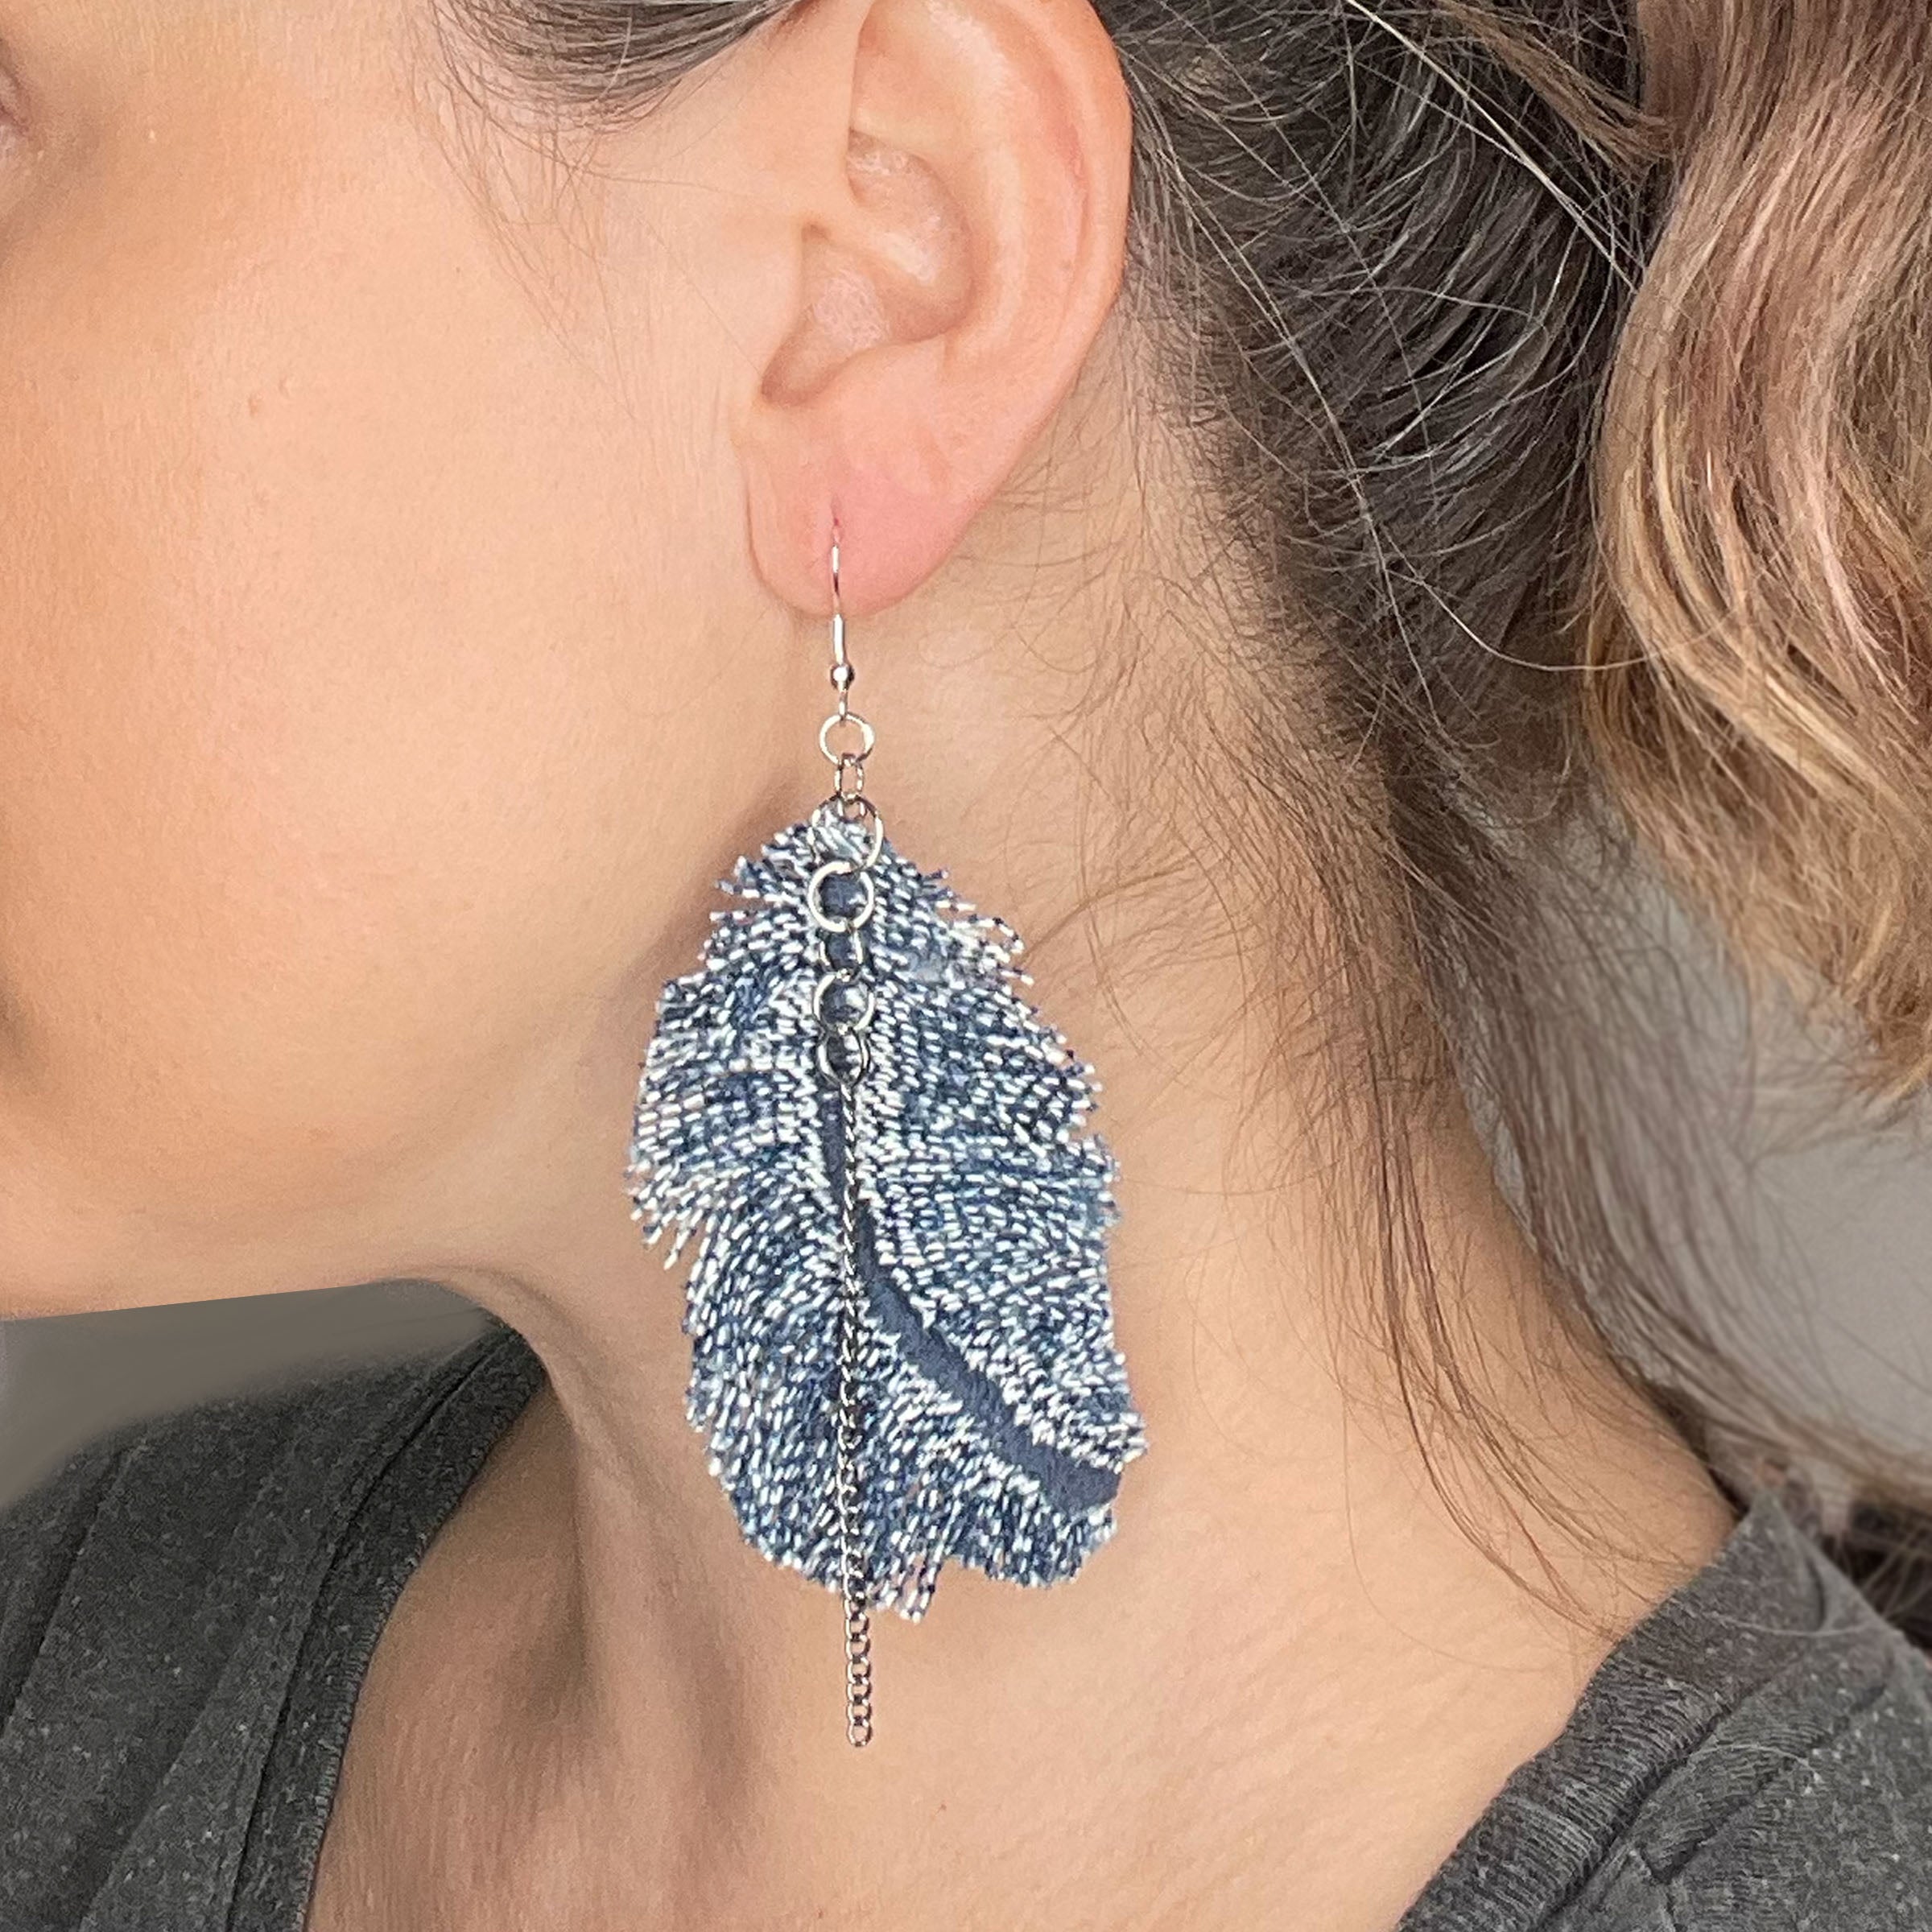 Shop the $14 Dupe for Hailey Bieber's Trendy Croissant Earrings